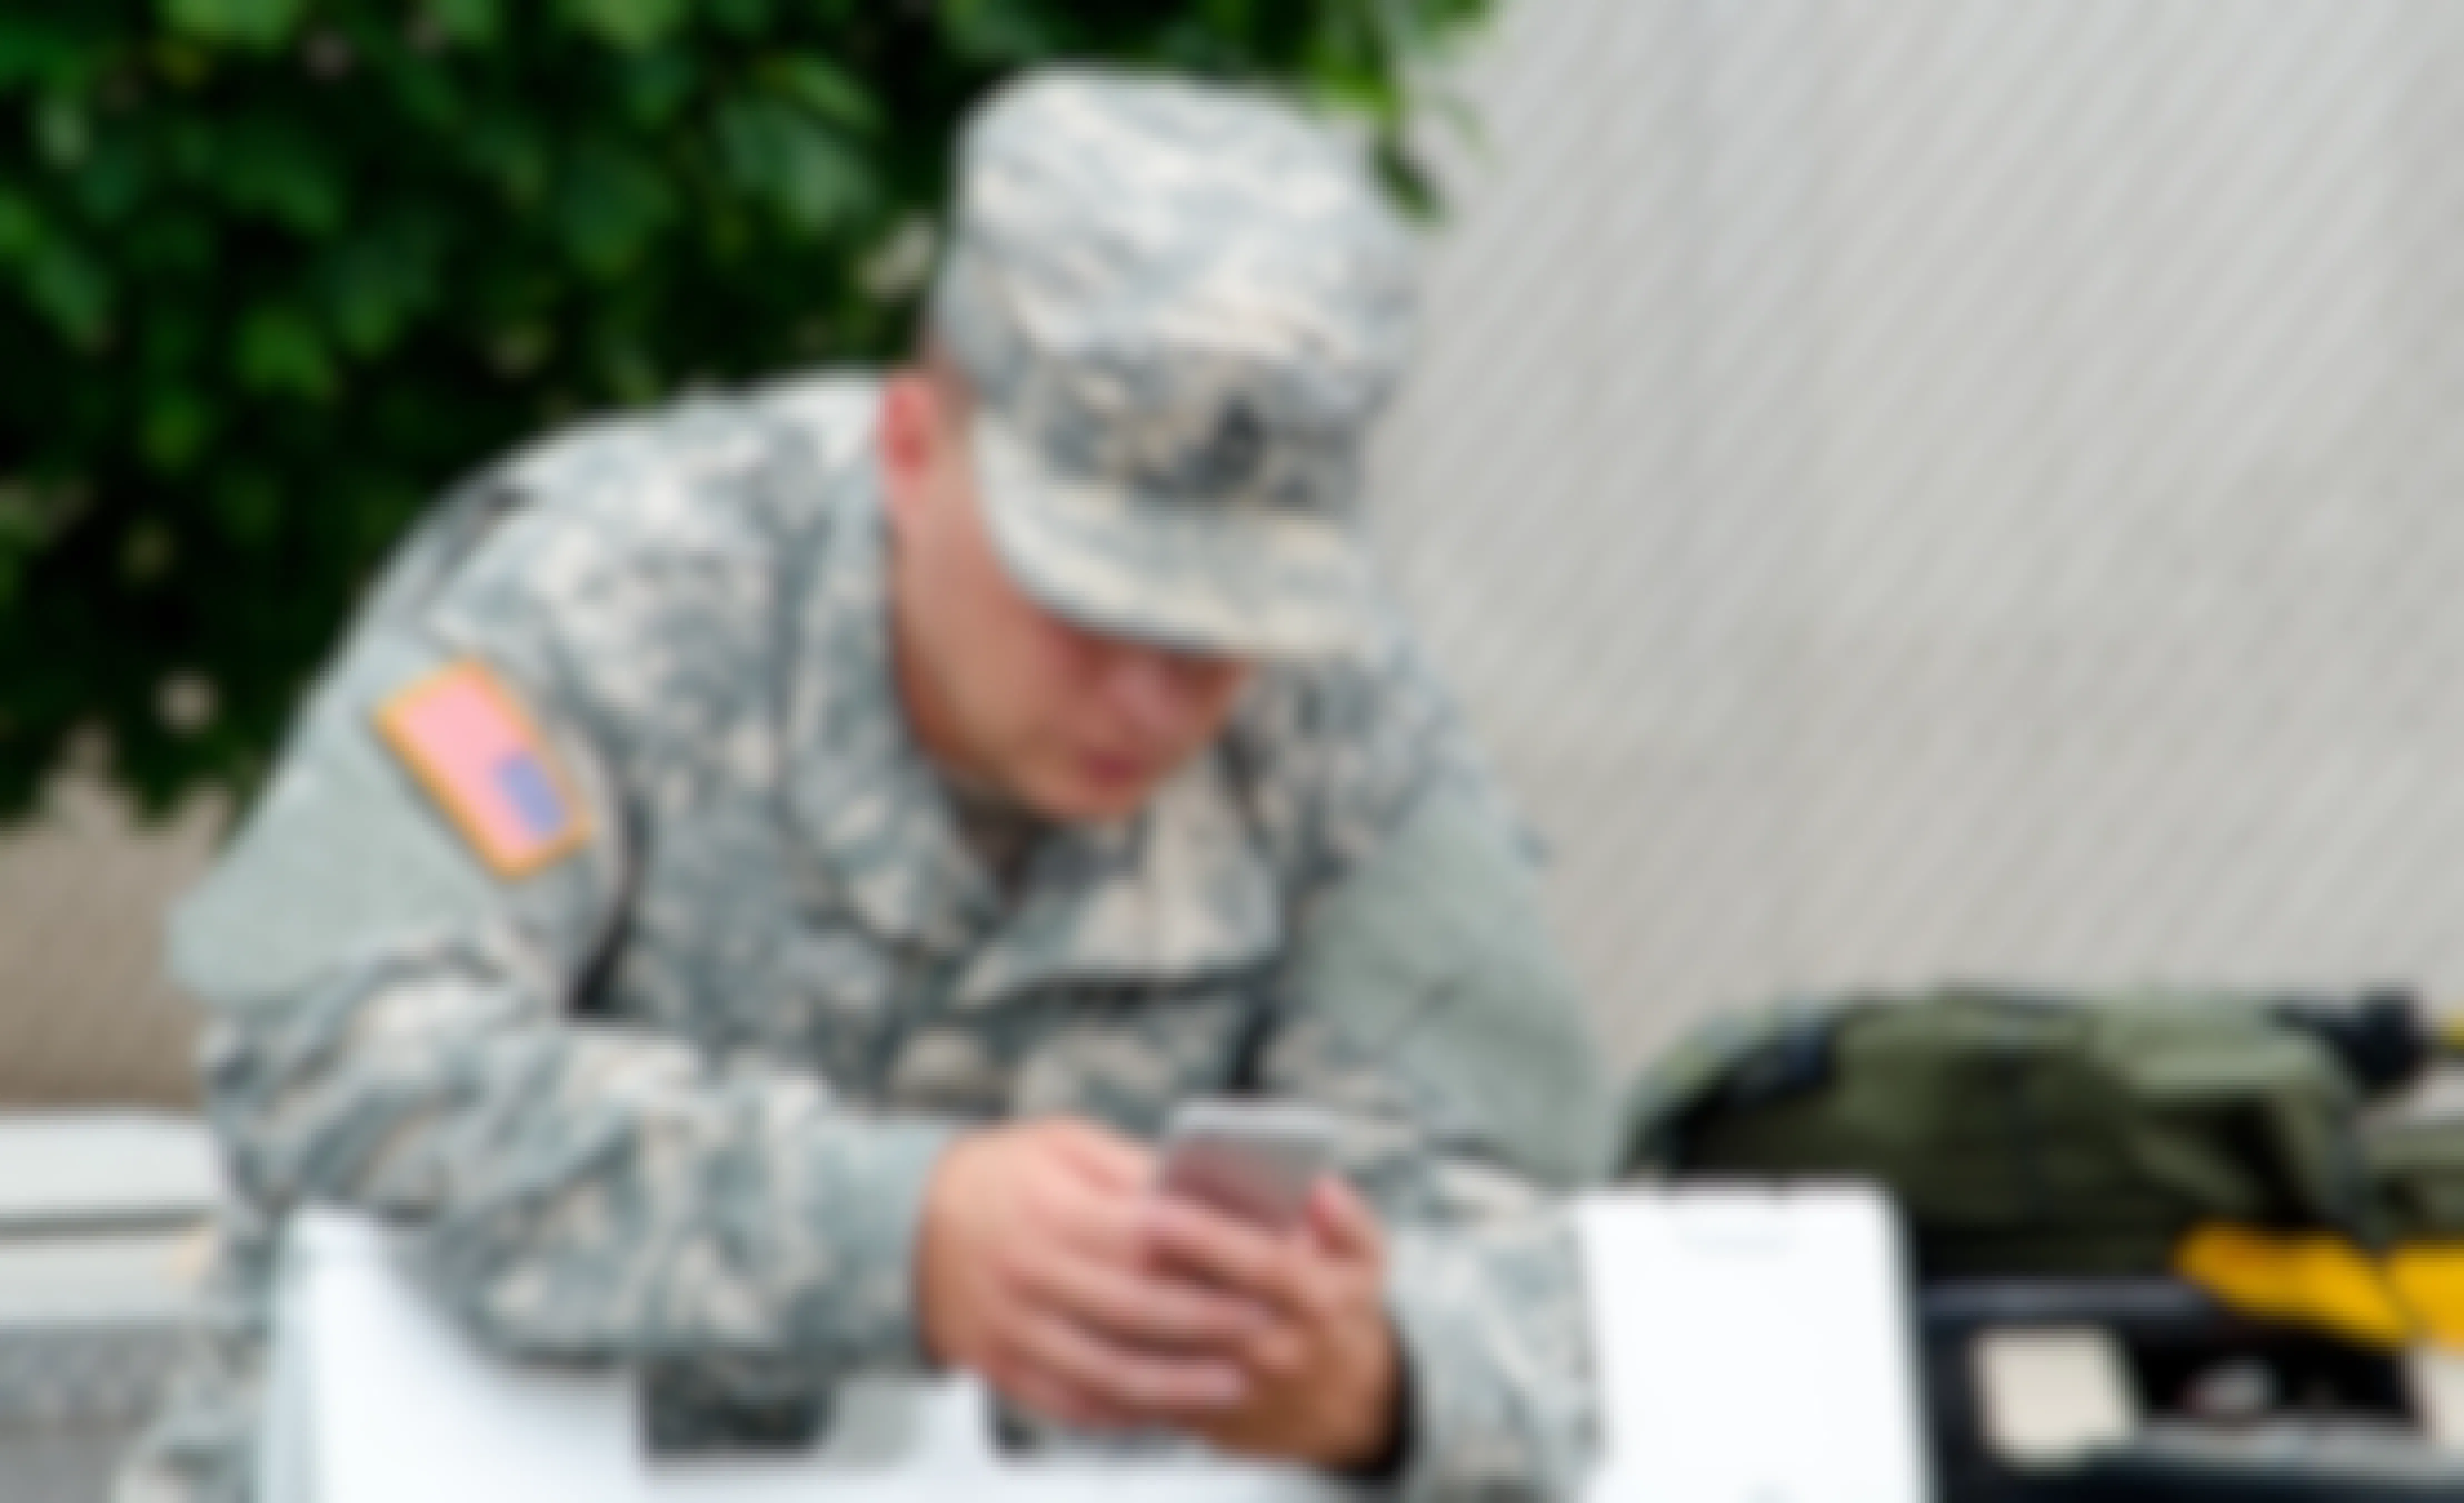 A man in a military uniform looking at a cell phone.